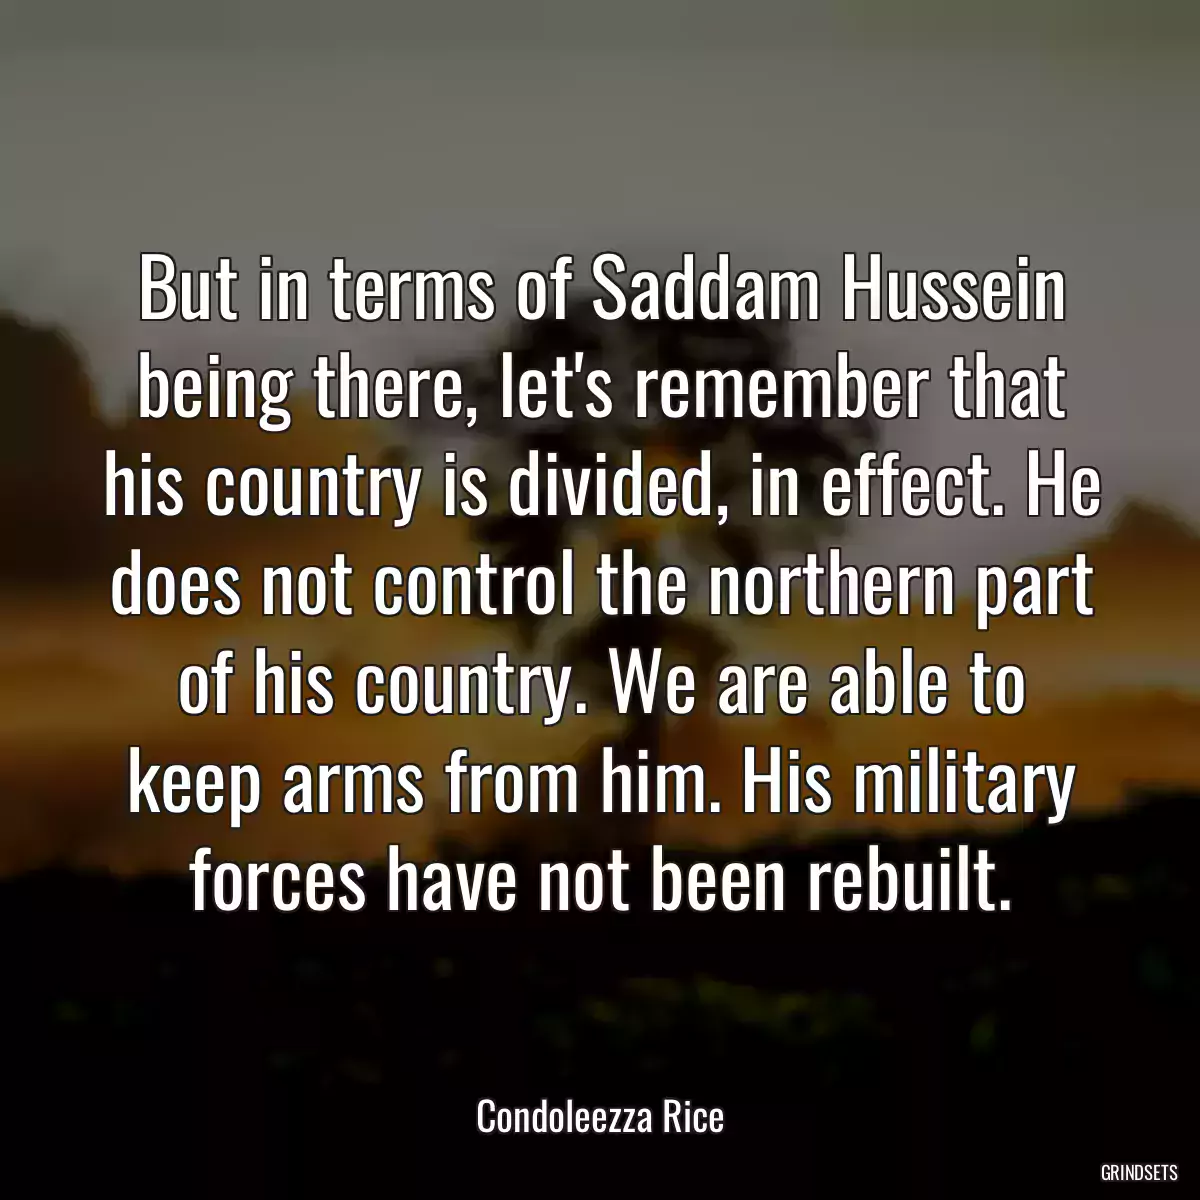 But in terms of Saddam Hussein being there, let\'s remember that his country is divided, in effect. He does not control the northern part of his country. We are able to keep arms from him. His military forces have not been rebuilt.